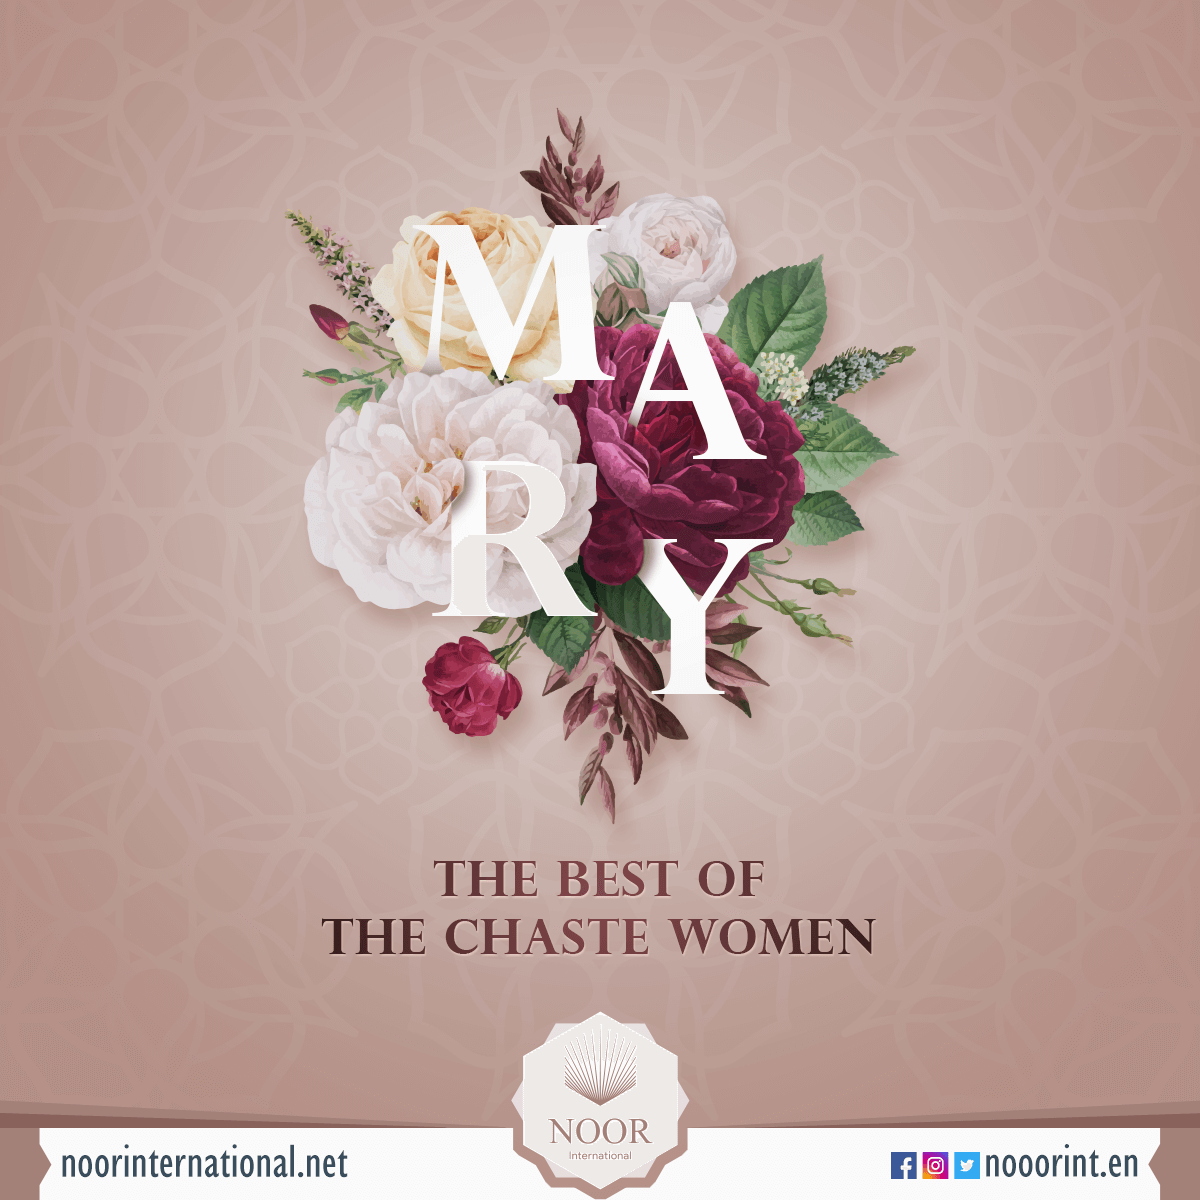 Mary the best of the chaste women